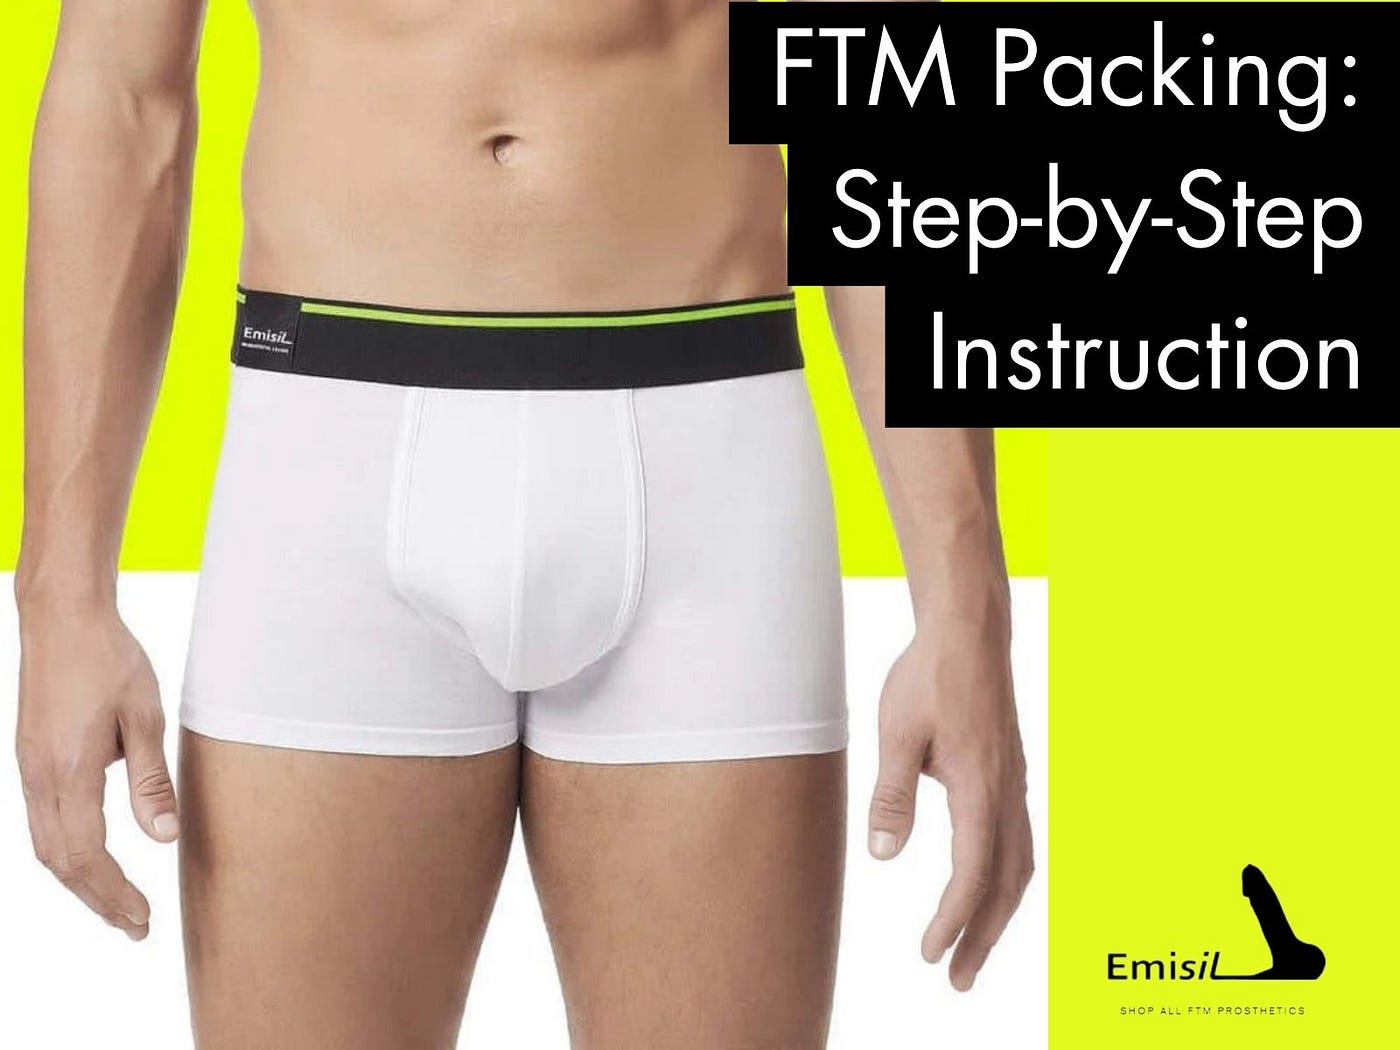 Packing underwear, FTM packing boxers, non-binary packing boxers